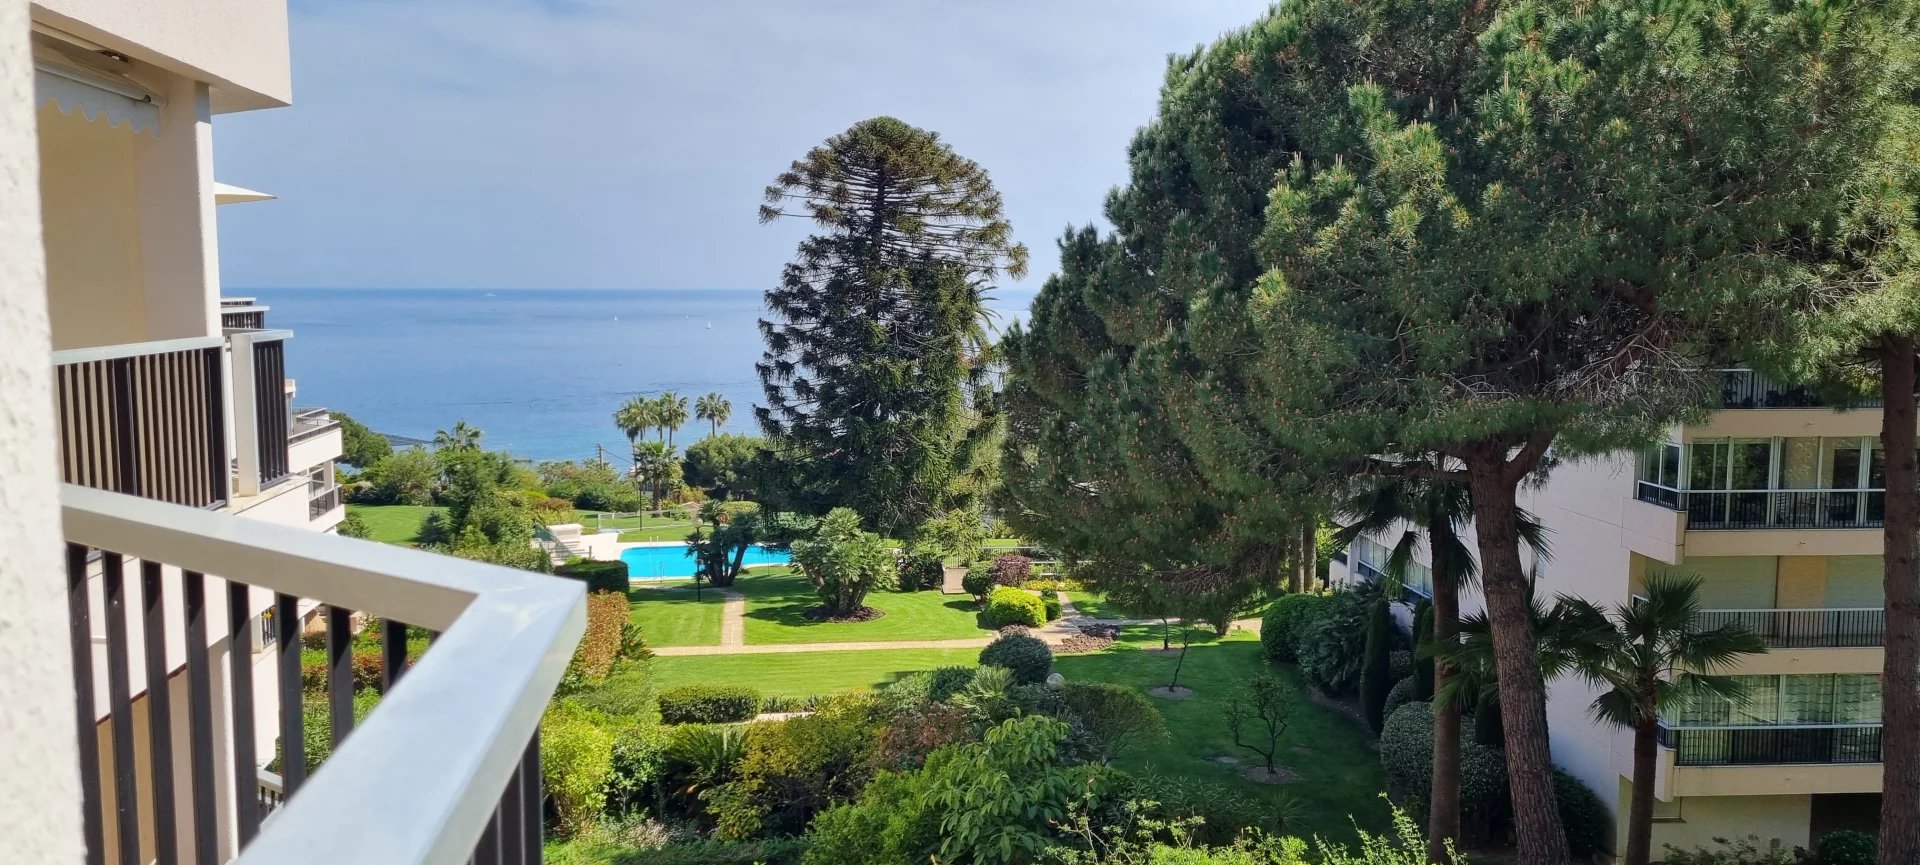 Property for sale in a residence with tennis and swimming pool Cannes Californie